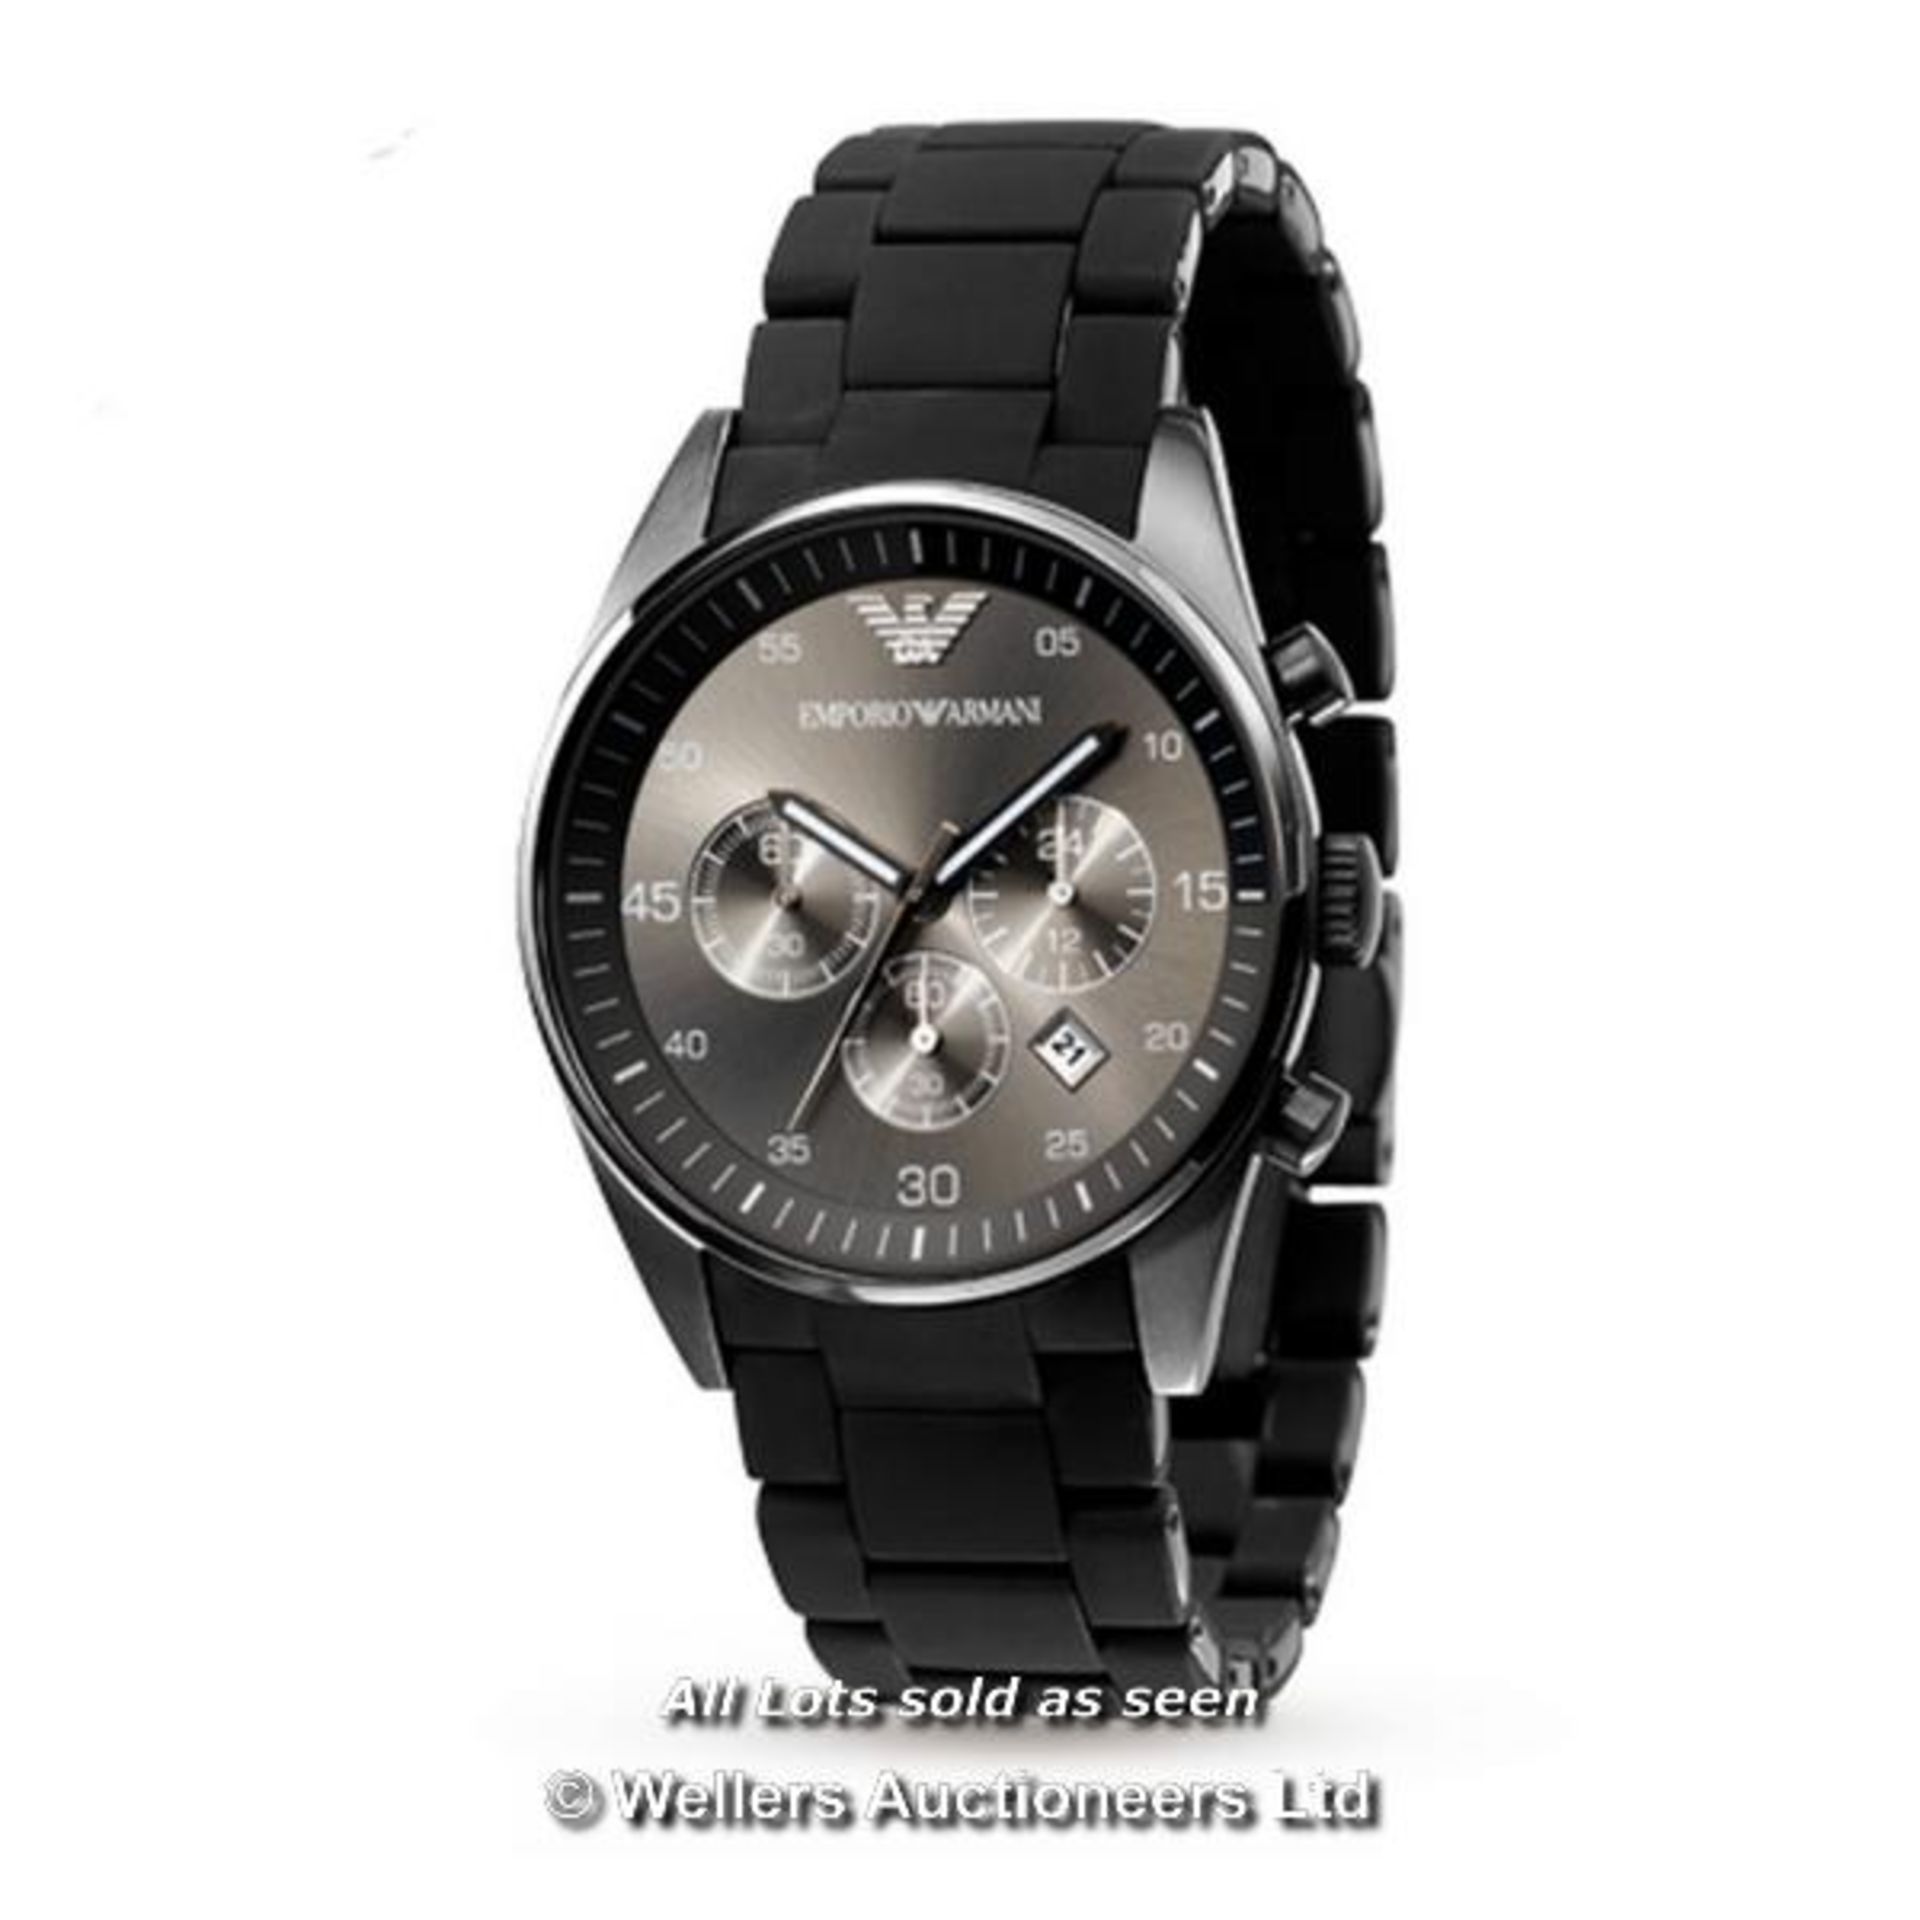 EMPORIO ARMANI AR5889 MEN'S TAZIO CHRONOGRAPH WATCH RRP �329 (THIS LOT DOES NOT ATTRACT VAT ON THE